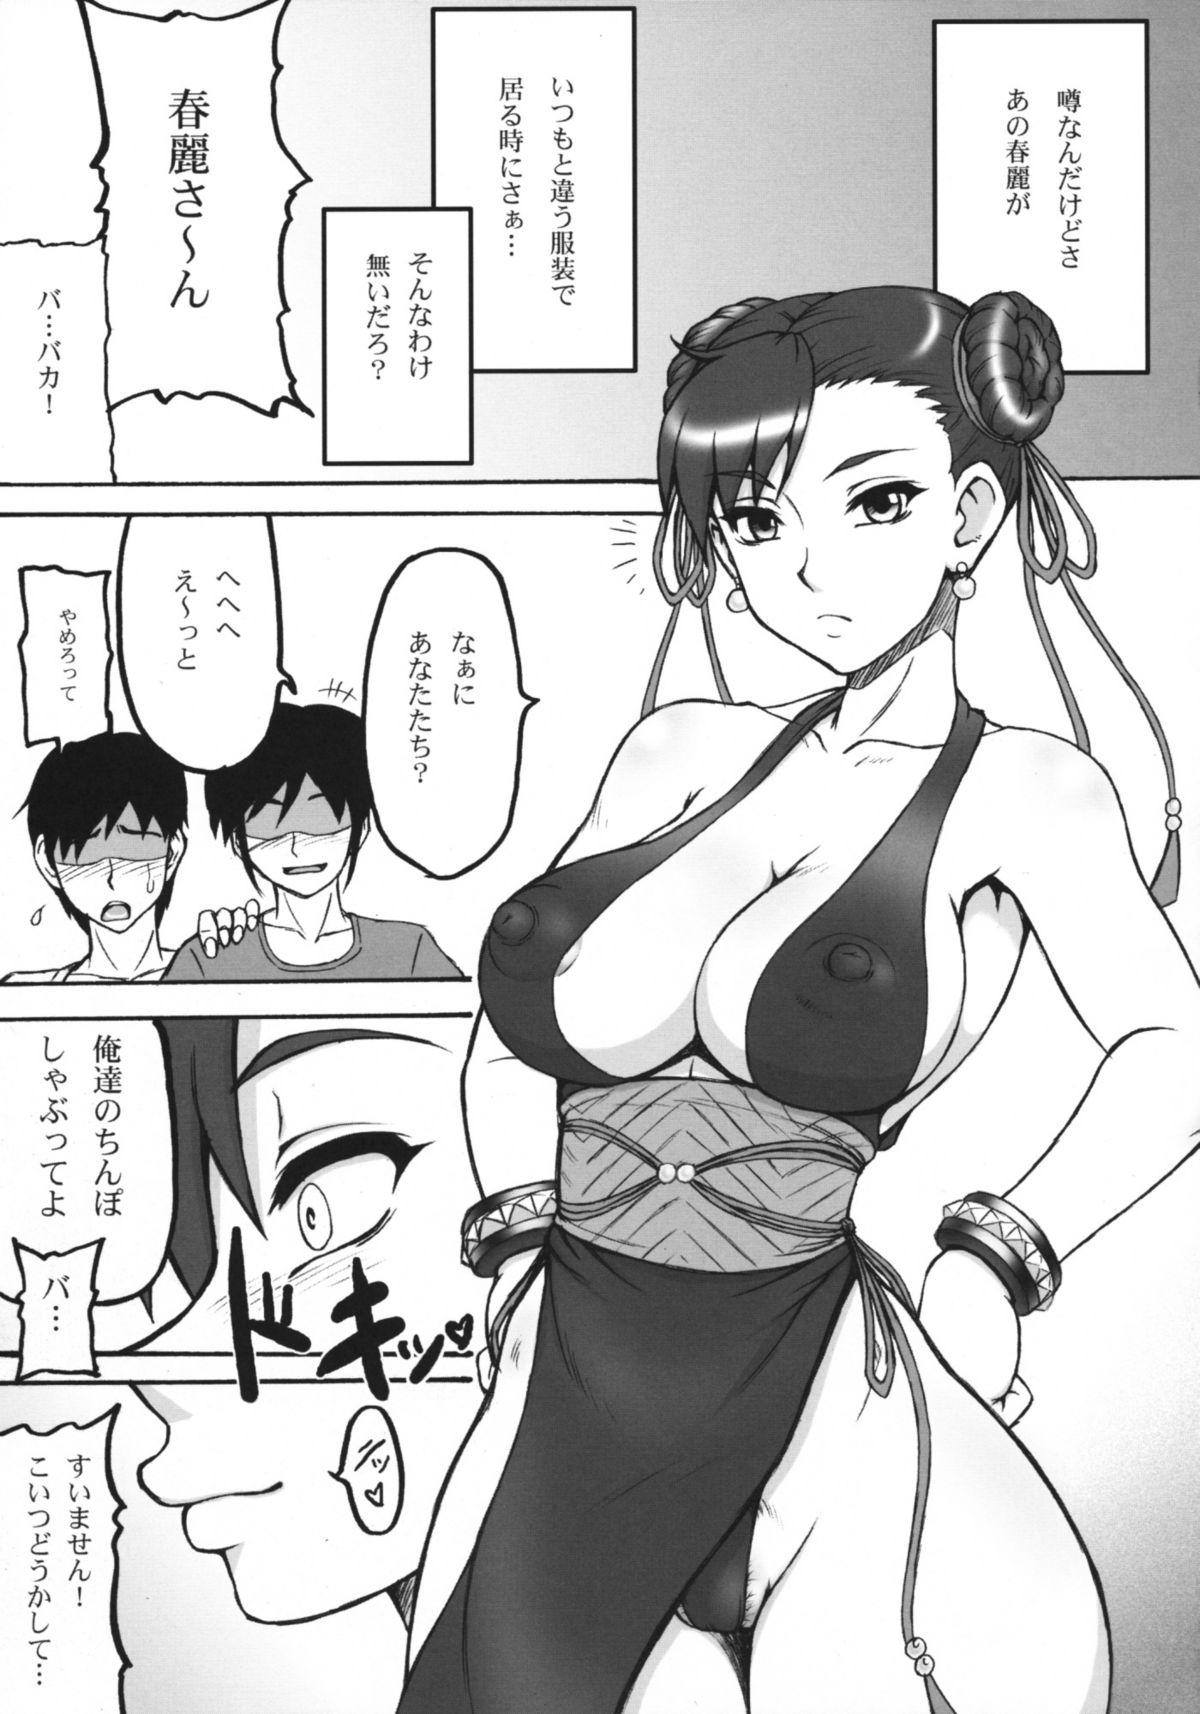 Sexy Whores Kaku Musume 11 - Street fighter Double - Page 5